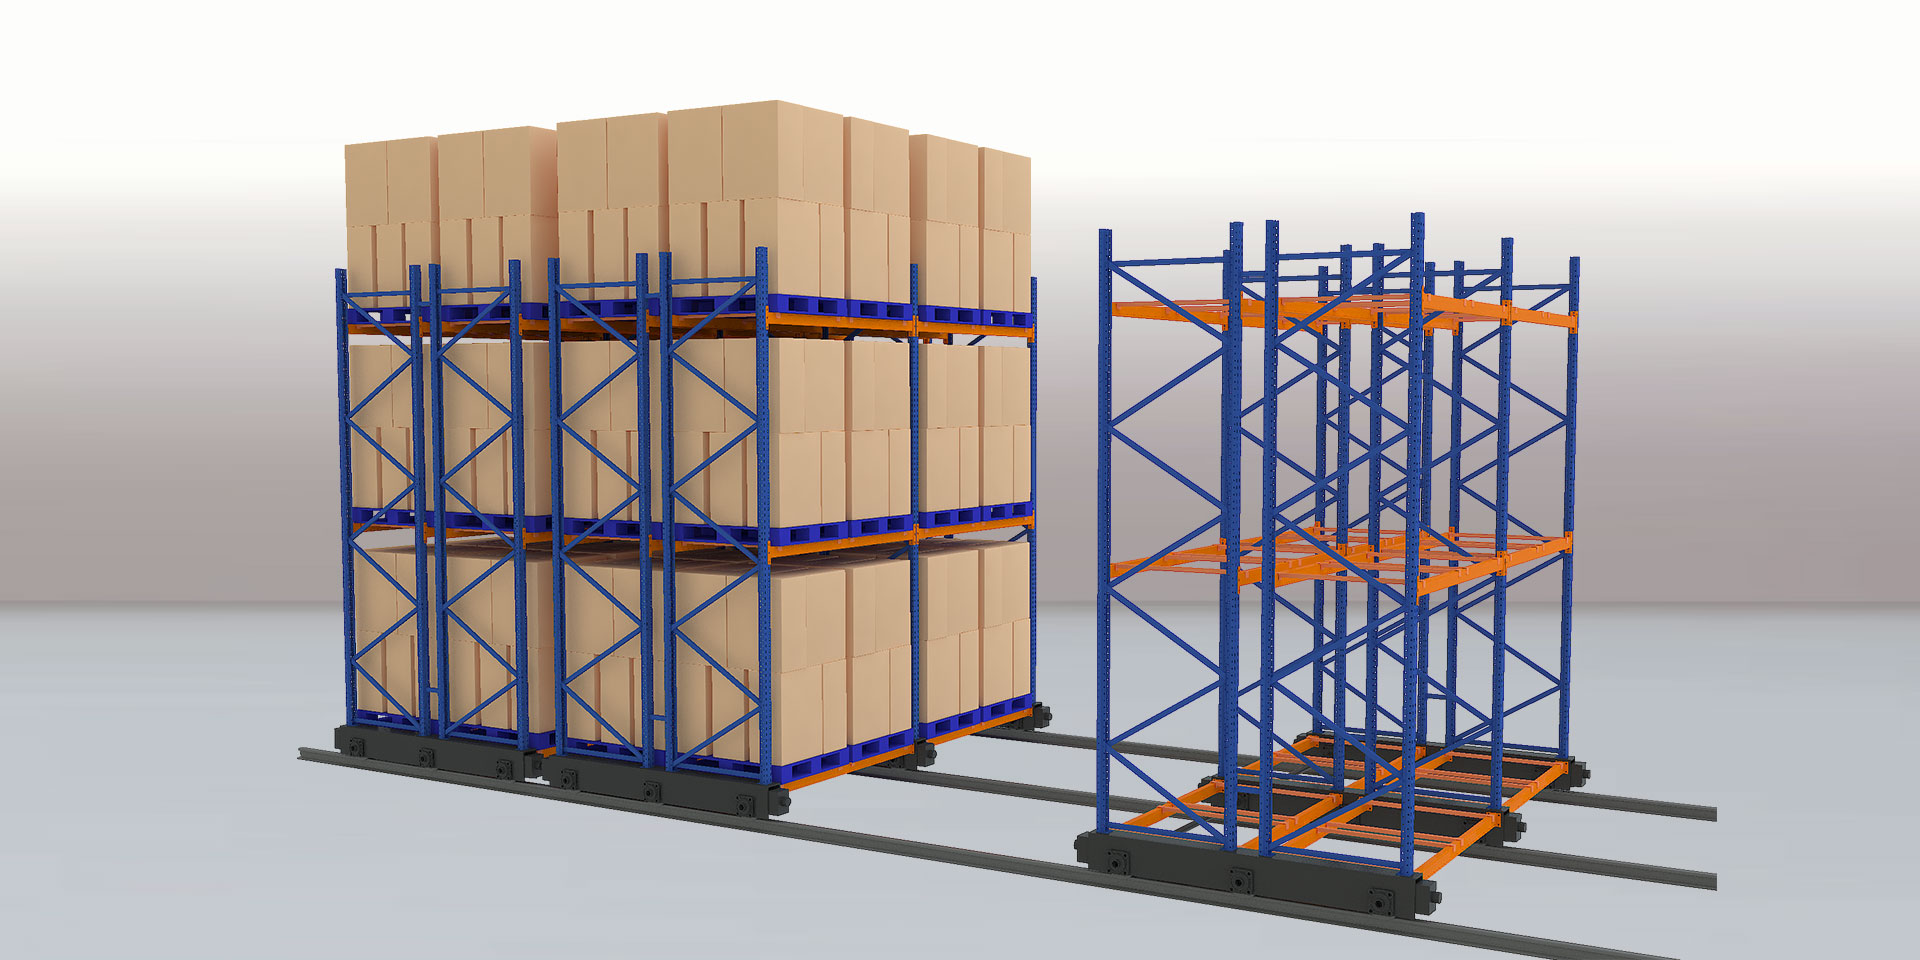 How does the shuttle racking system consider the unitization of goods